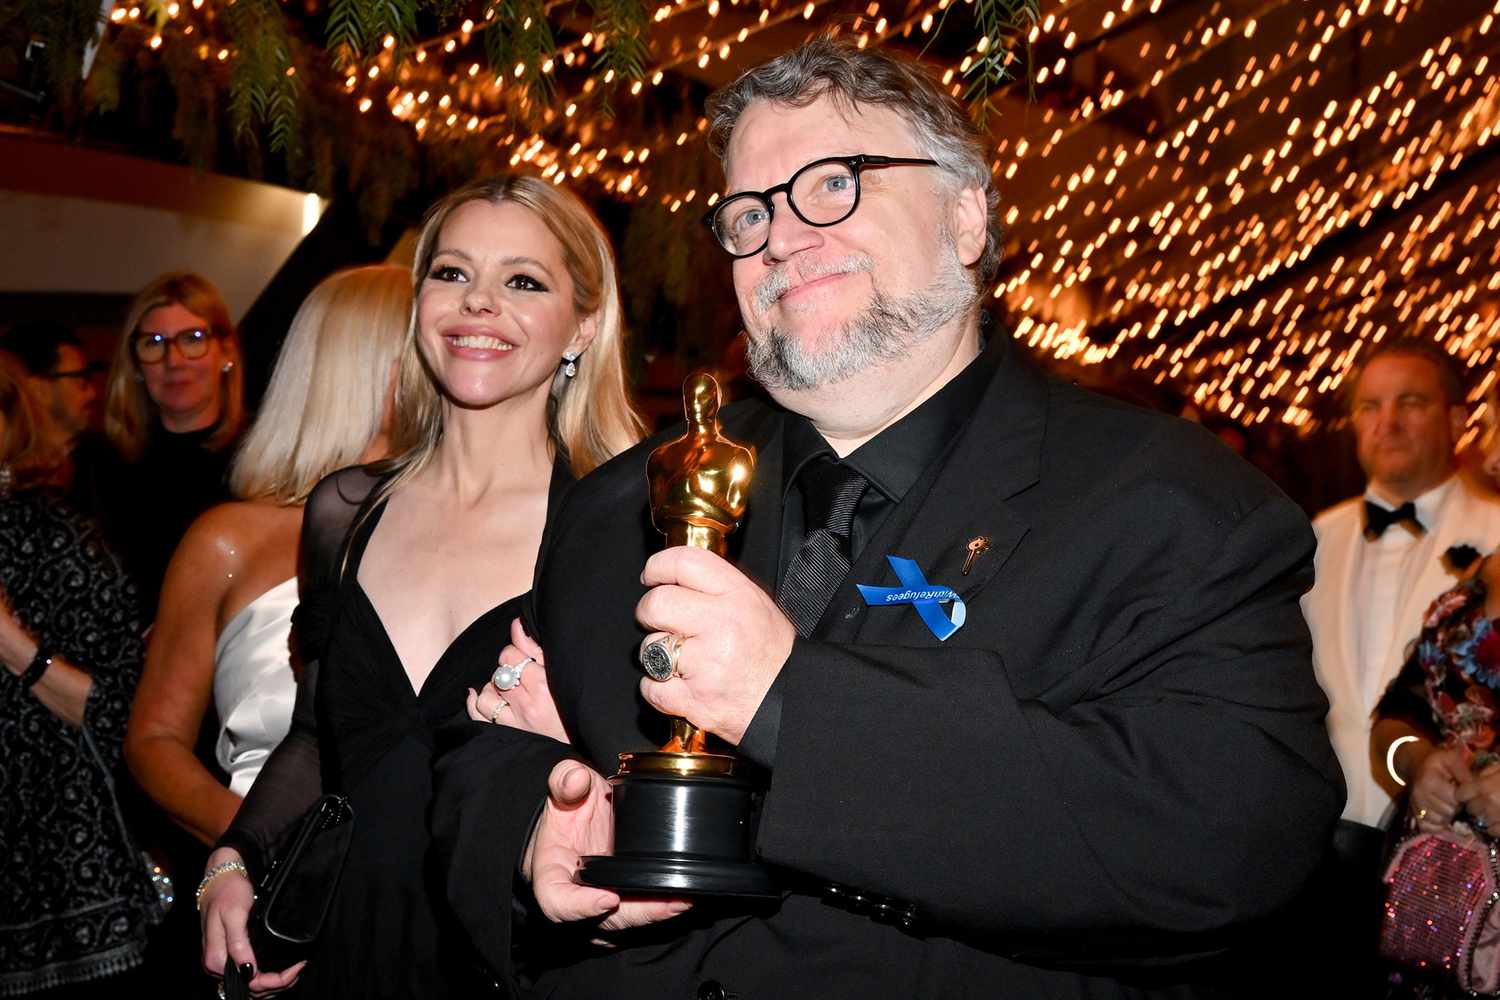 Kim Morgan and Guillermo del Toro at the 95th Annual Academy Awards Governors Ball held at Dolby Theatre on March 12, 2023 in Los Angeles, California.